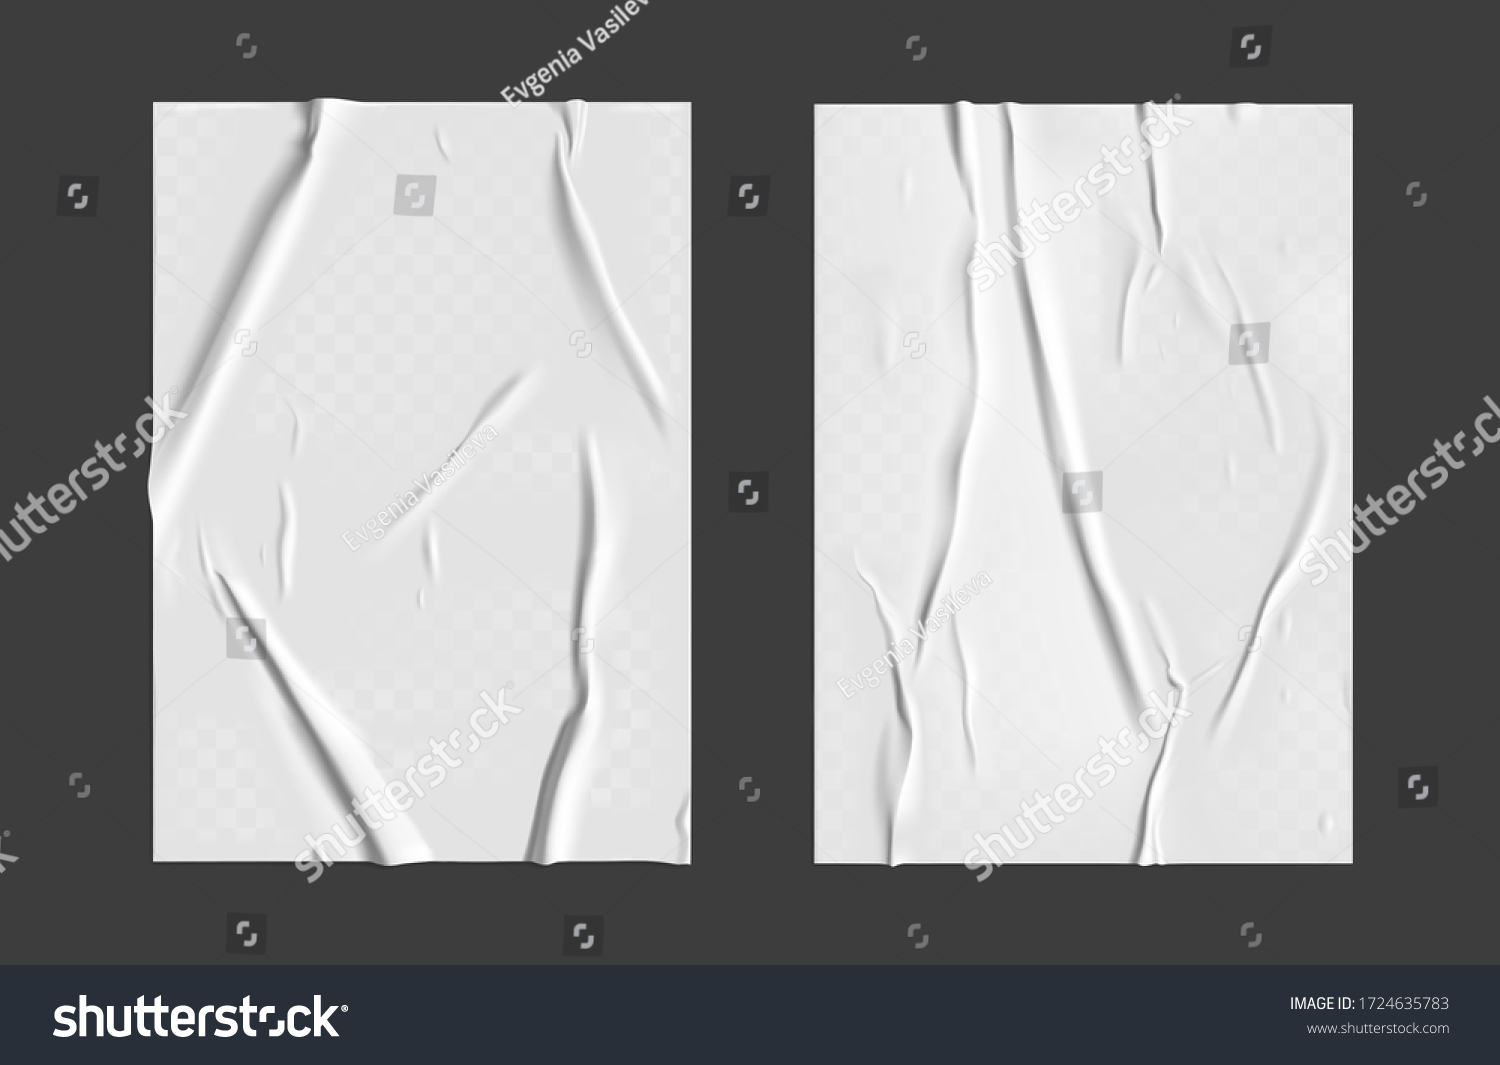 Glued paper set with wet transparent wrinkled effect on gray background. White wet paper poster template set with crumpled texture. Realistic vector posters mockup #1724635783